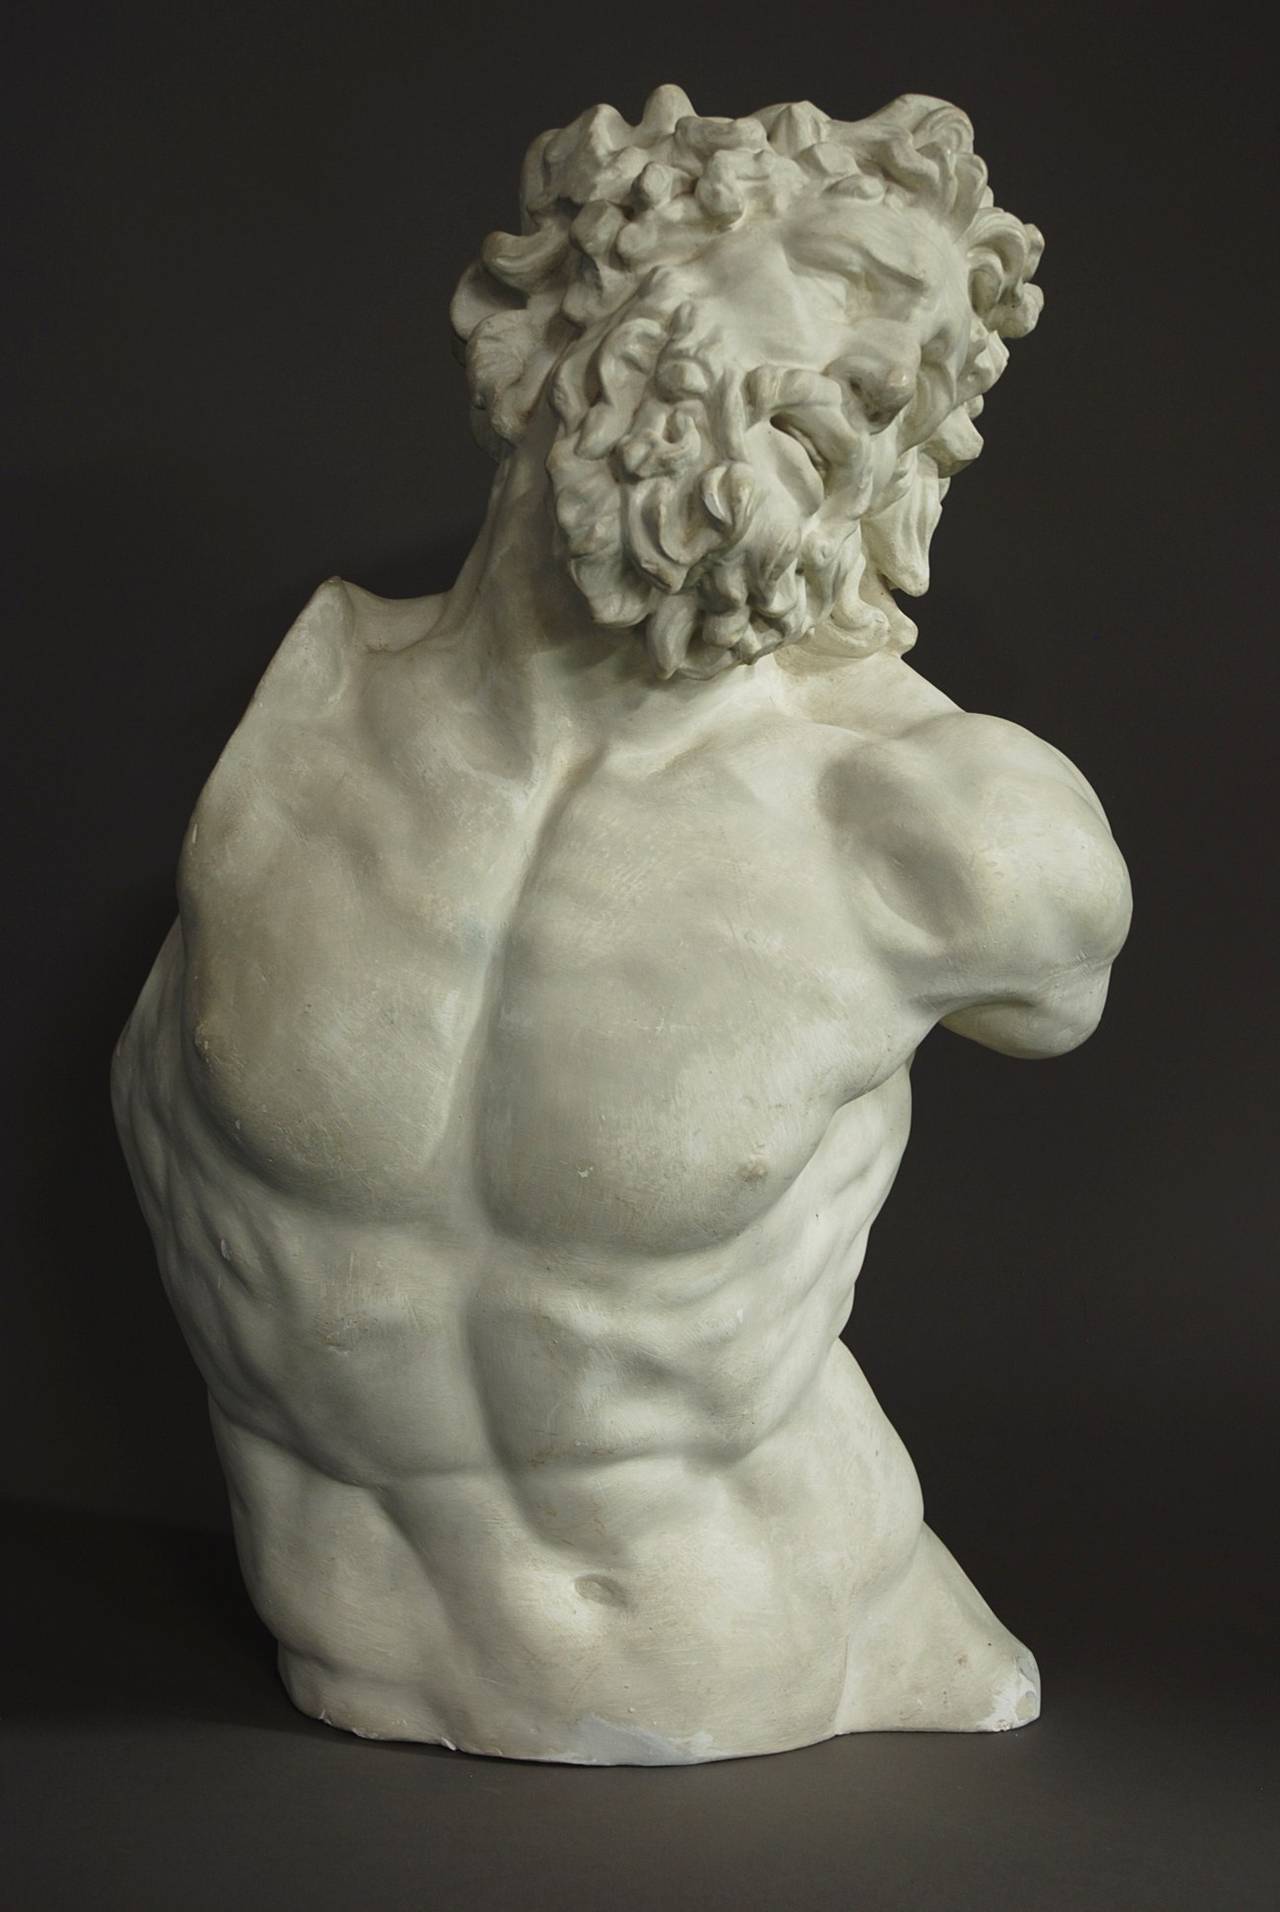 A plaster torso figure of the Trojan priest, Laocoon.

This figure is taken from the famous Italian statue 'Laocoon & His Sons' dating from 100BC and excavated in Rome in 1506 and can be seen in The Vatican.

In the sculpture he is depicted